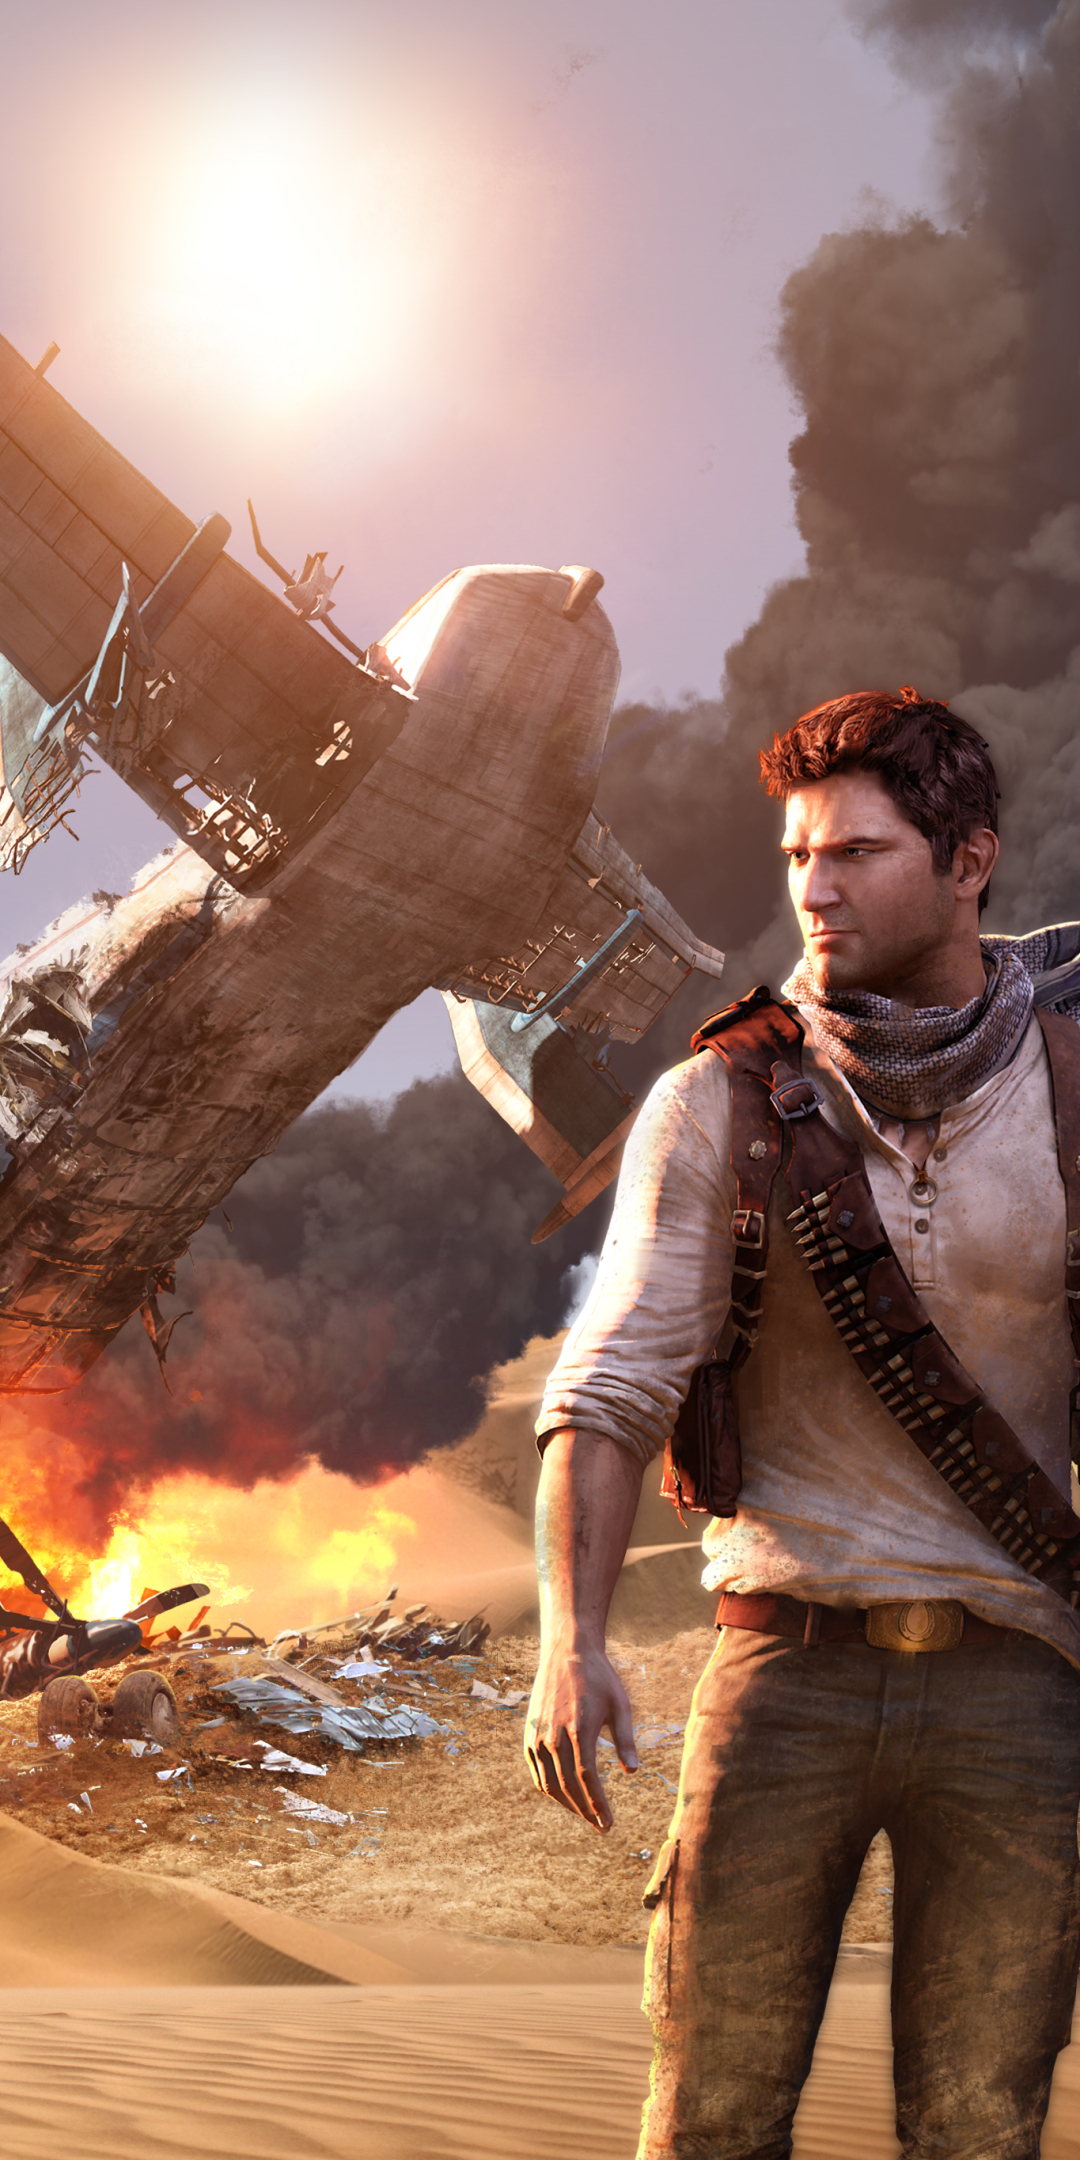 nathan drake, video game, uncharted 3: drake's deception, uncharted cell phone wallpapers